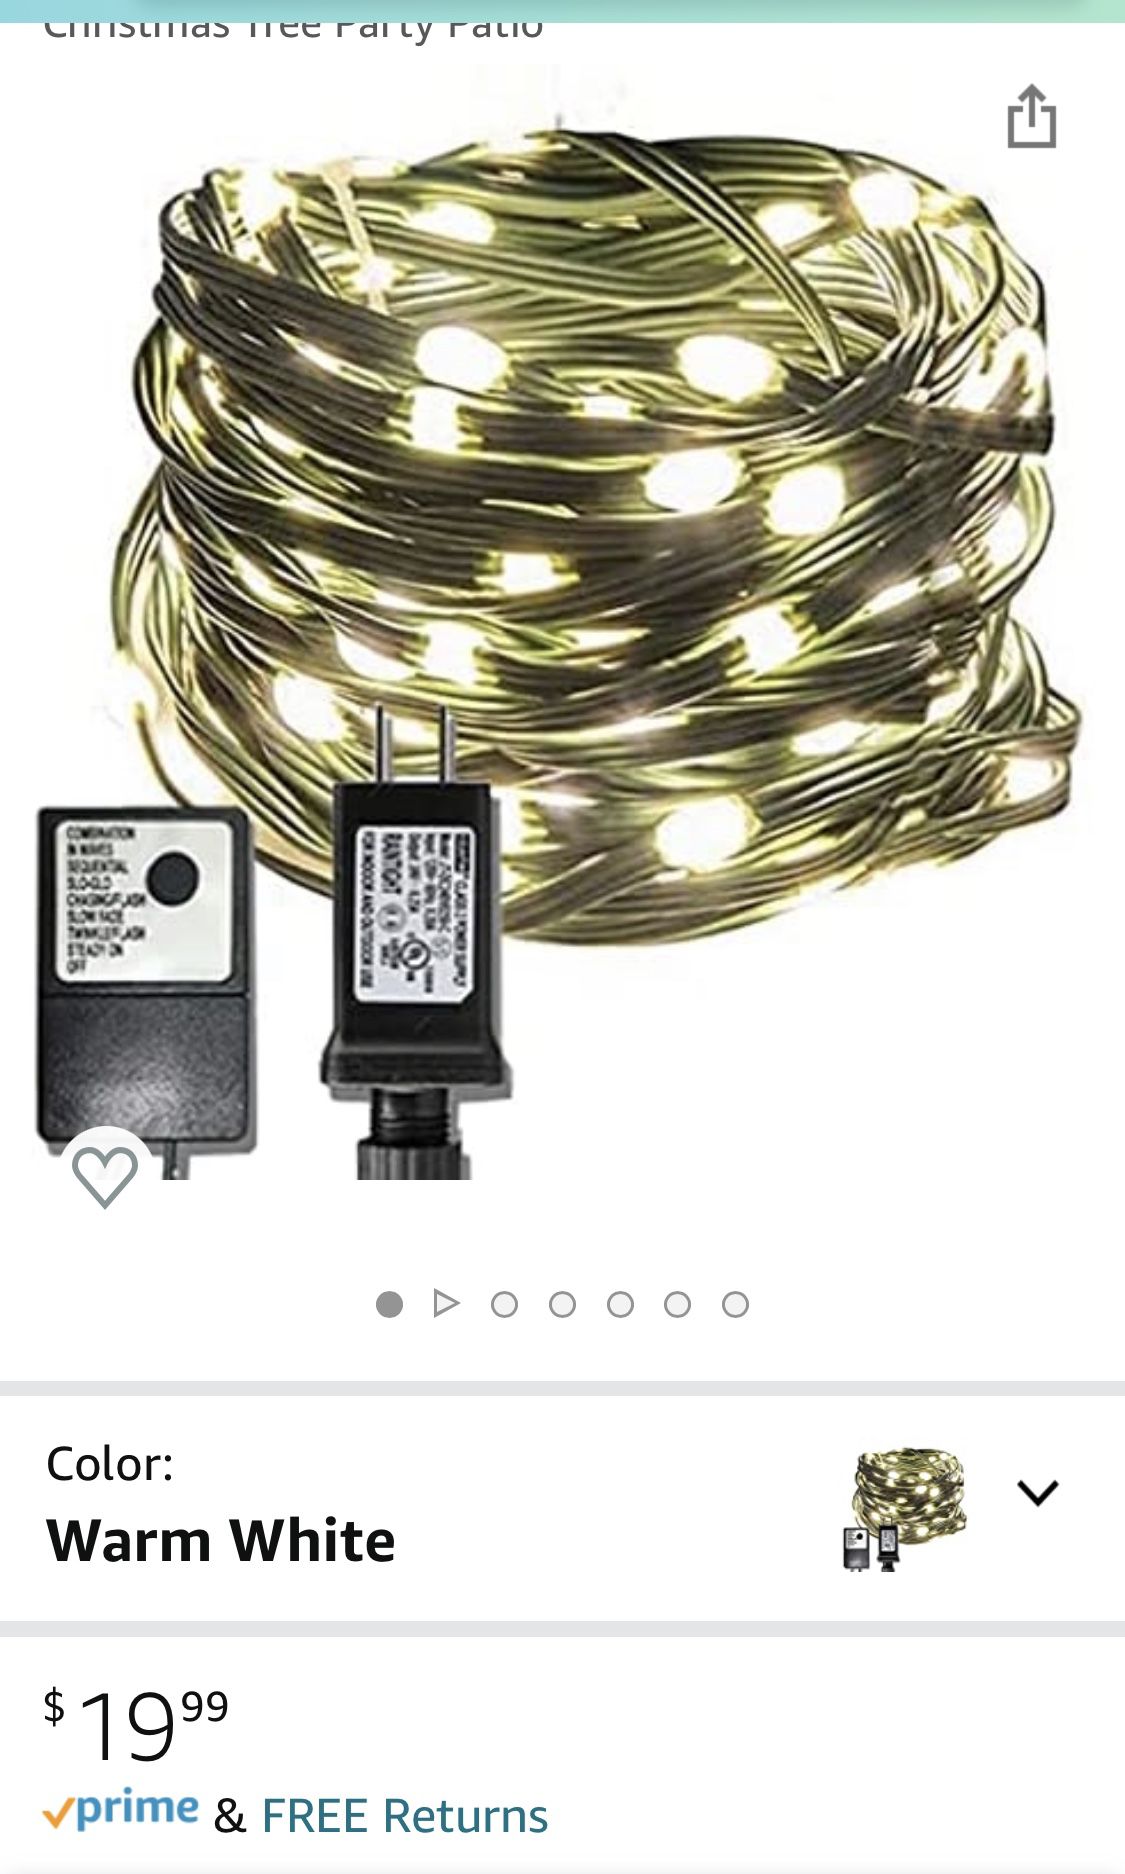 150LT 49FT Heavy Duty Micro LED String Lights Plug-in Warm White 8 Modes with Controller UL Adapter Wire Waterproof for Home Decor Christmas Tree Part